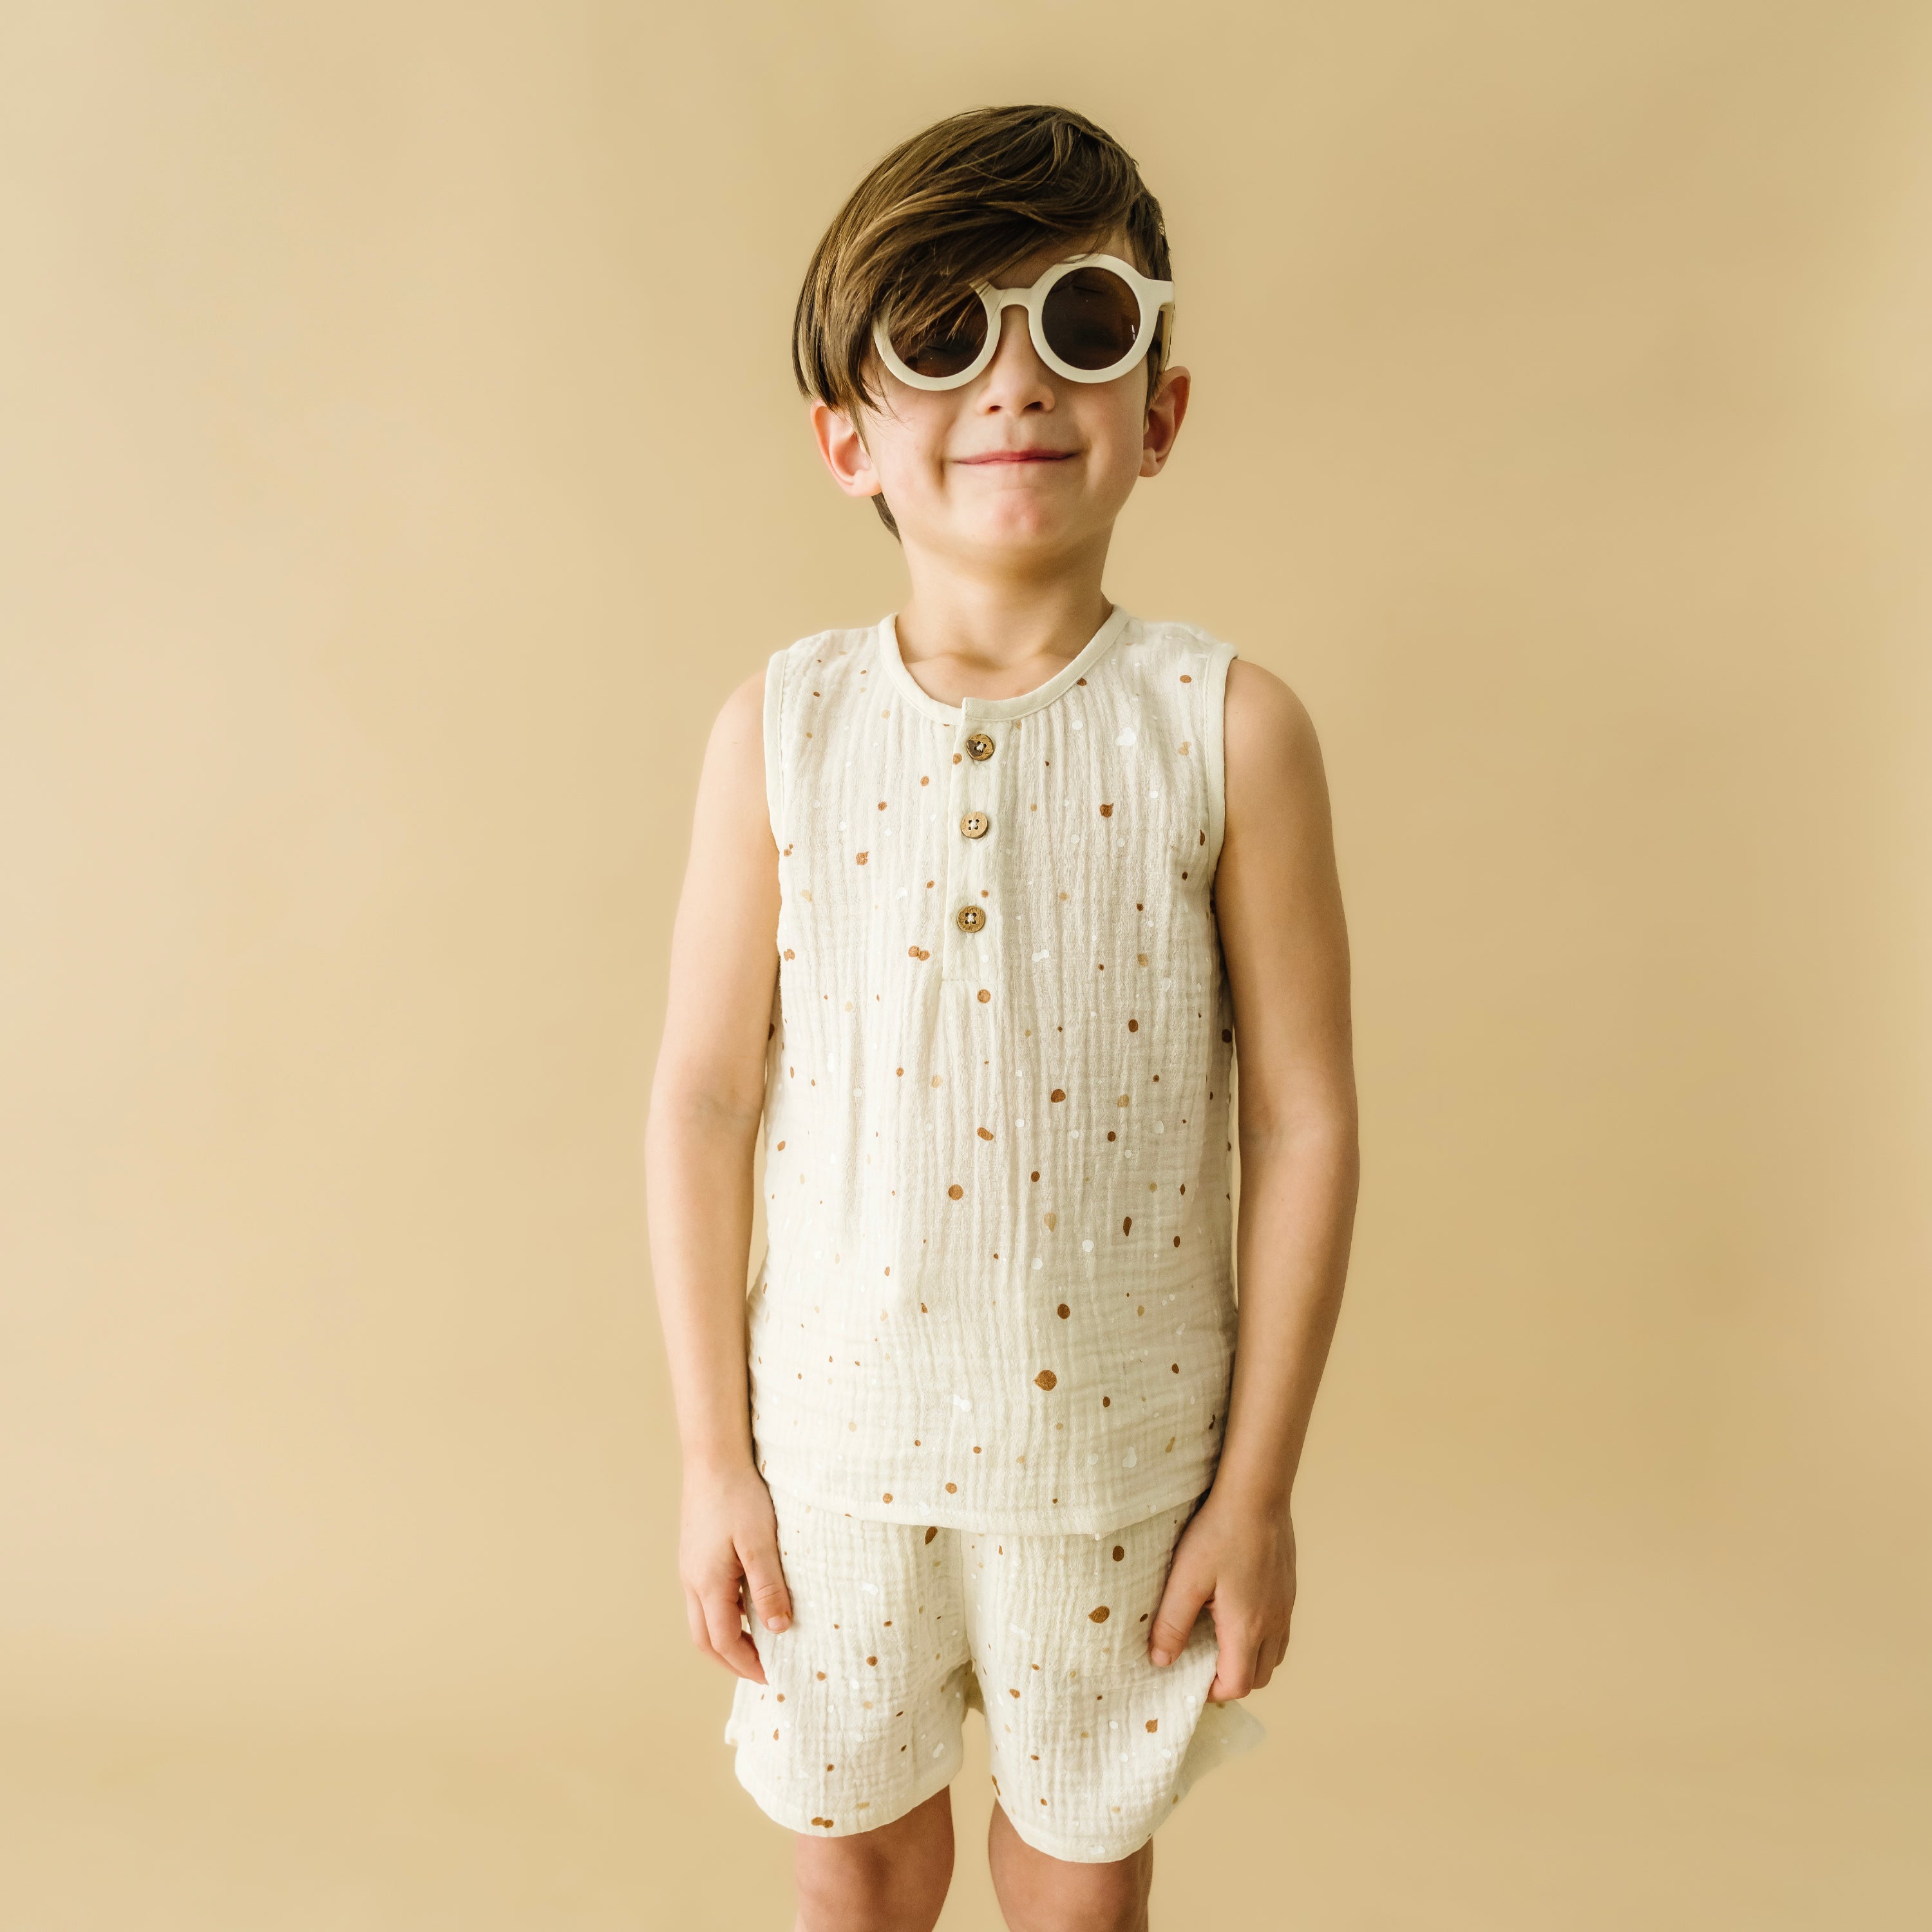 A young boy wearing a stylish white sleeveless top and shorts set from Organic Kids with matching round white sunglasses, smiling against a beige background.